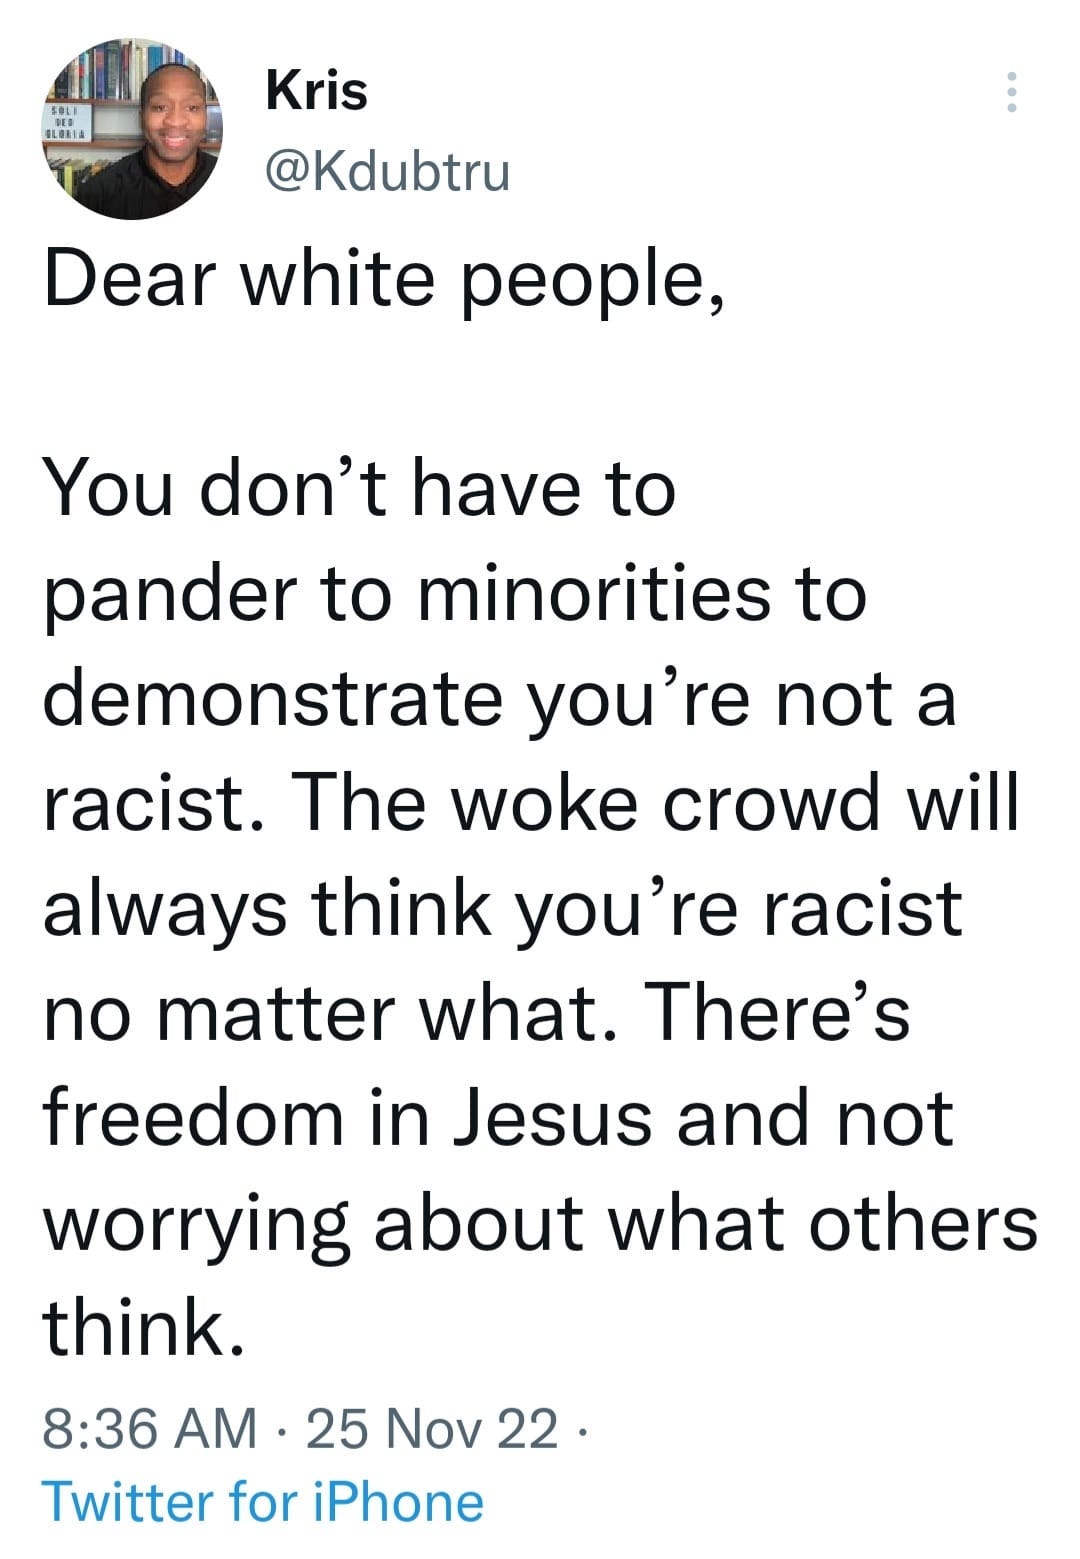 May be an image of 1 person and text that says 'Kris @Kdubtru Dear white people, You don't have to pander to minorities to demonstrate you're not a racist. The woke crowd will always think you're racist no matter what. There's freedom in Jesus and not worrying about what others think. 8:36 AM 25 Nov 22. 22 Twitter for iPhone'